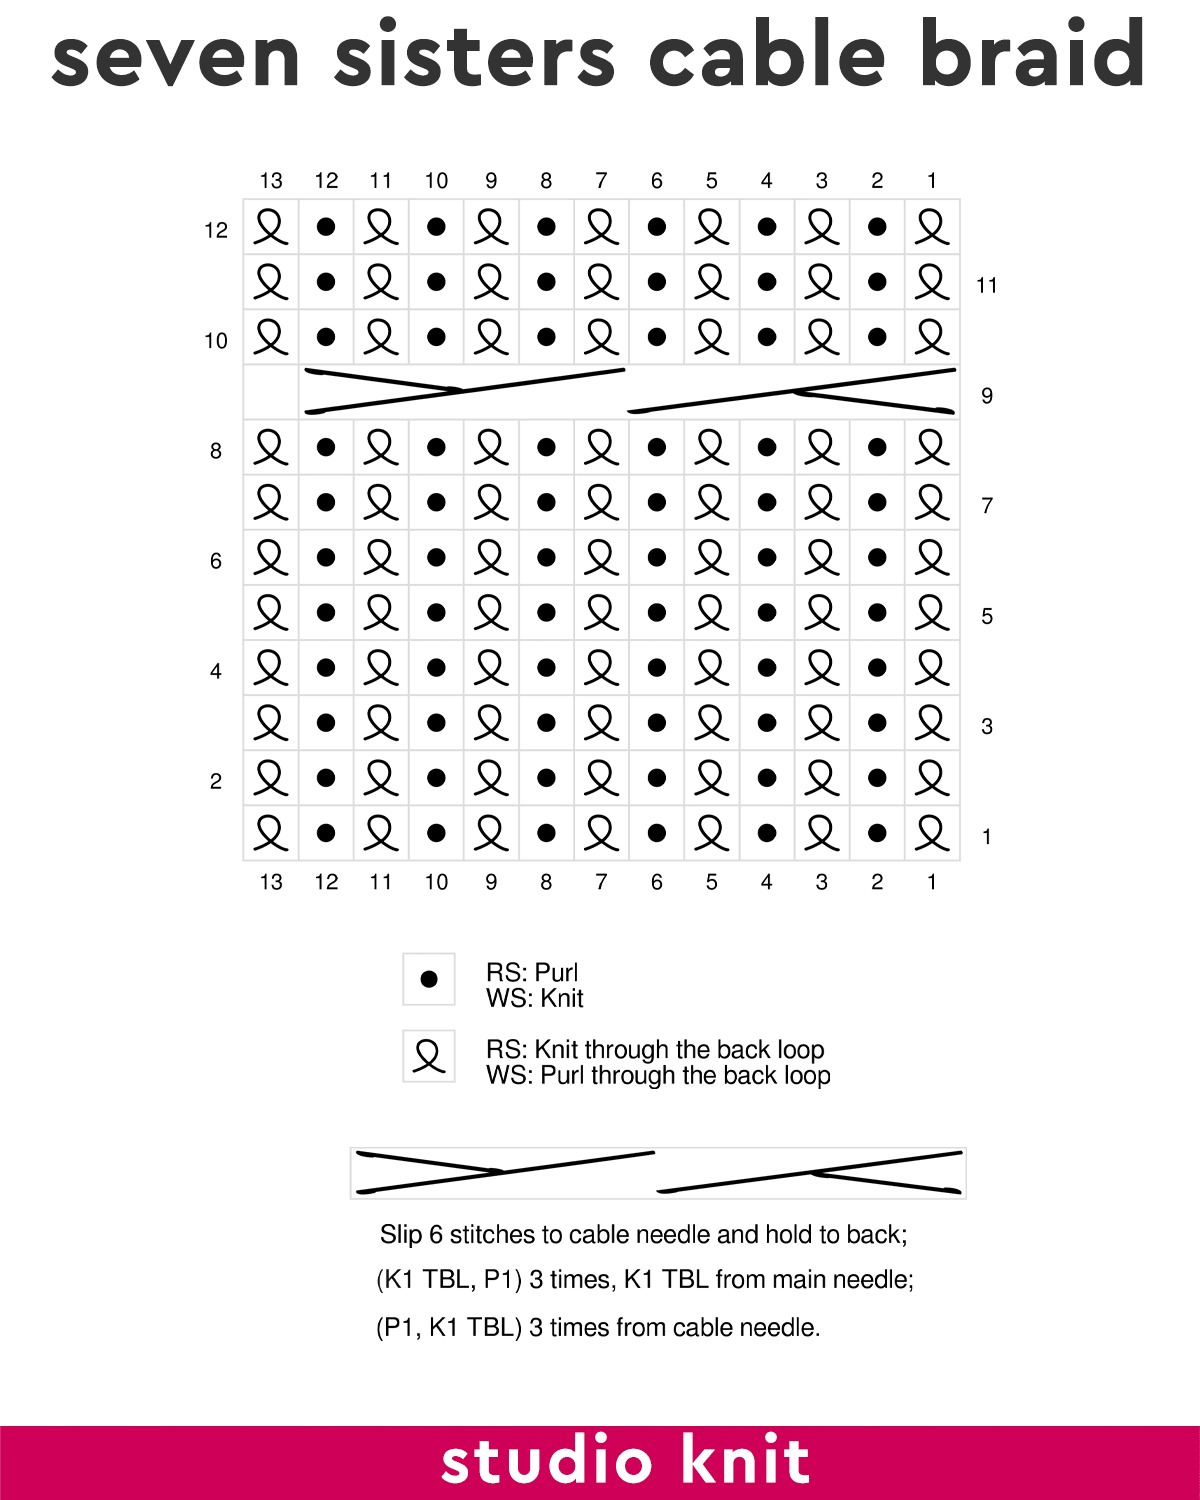 Knitting chart for the seven sisters cable braid stitch pattern.